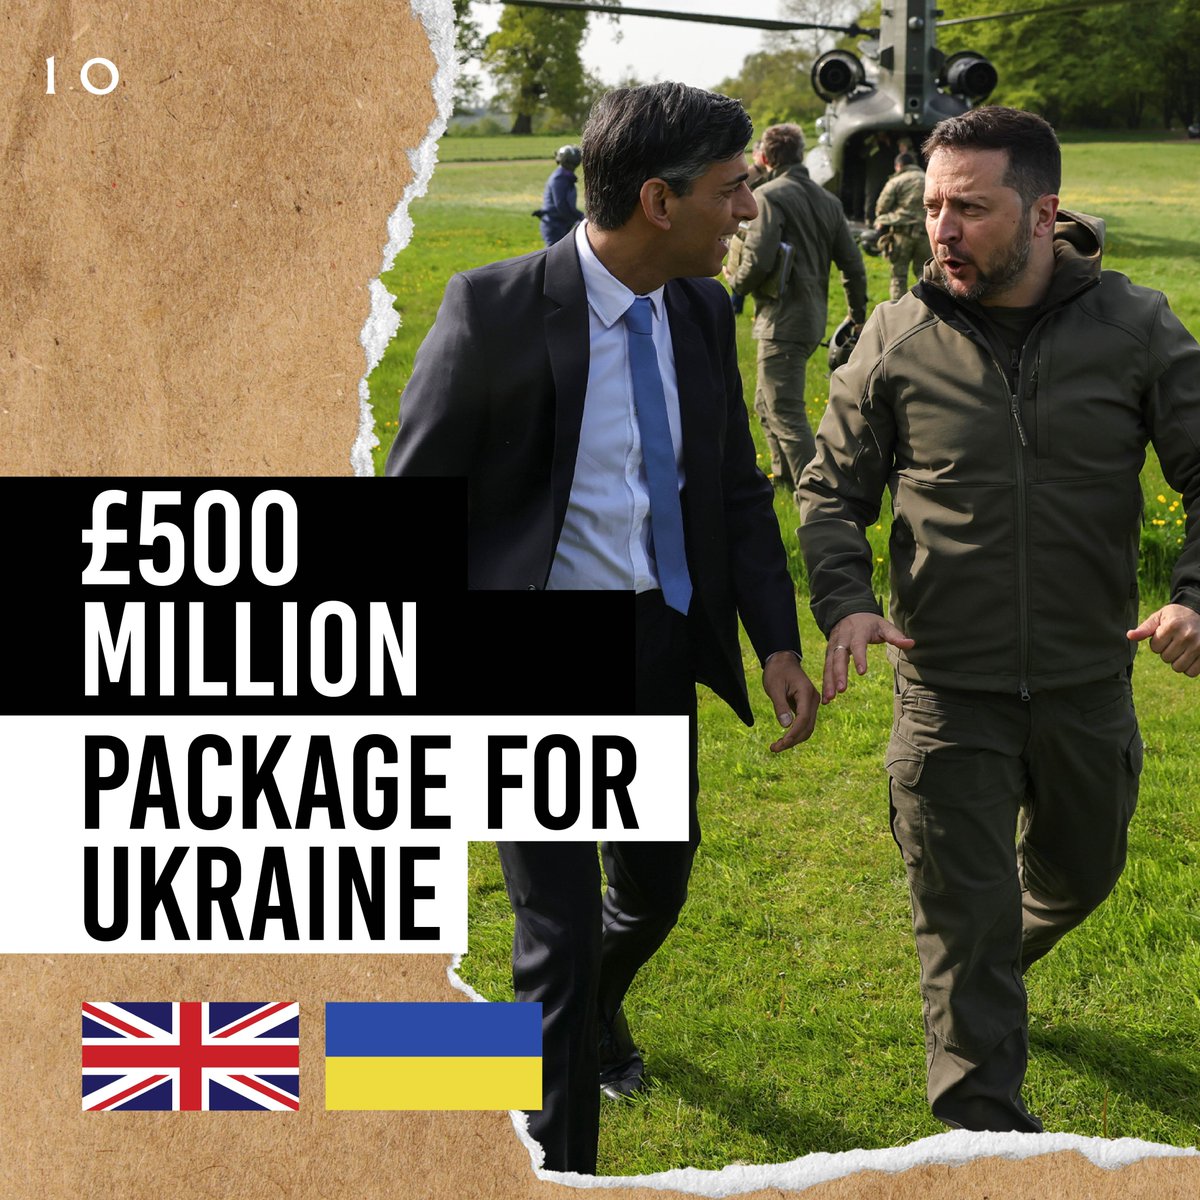 And we’re delivering the largest military aid package to Ukraine. £500 million in funding and vital equipment including 400 vehicles, 1,600 munitions and 4 million rounds of ammunition. We will support Ukraine for as long as it takes 🇬🇧🇺🇦